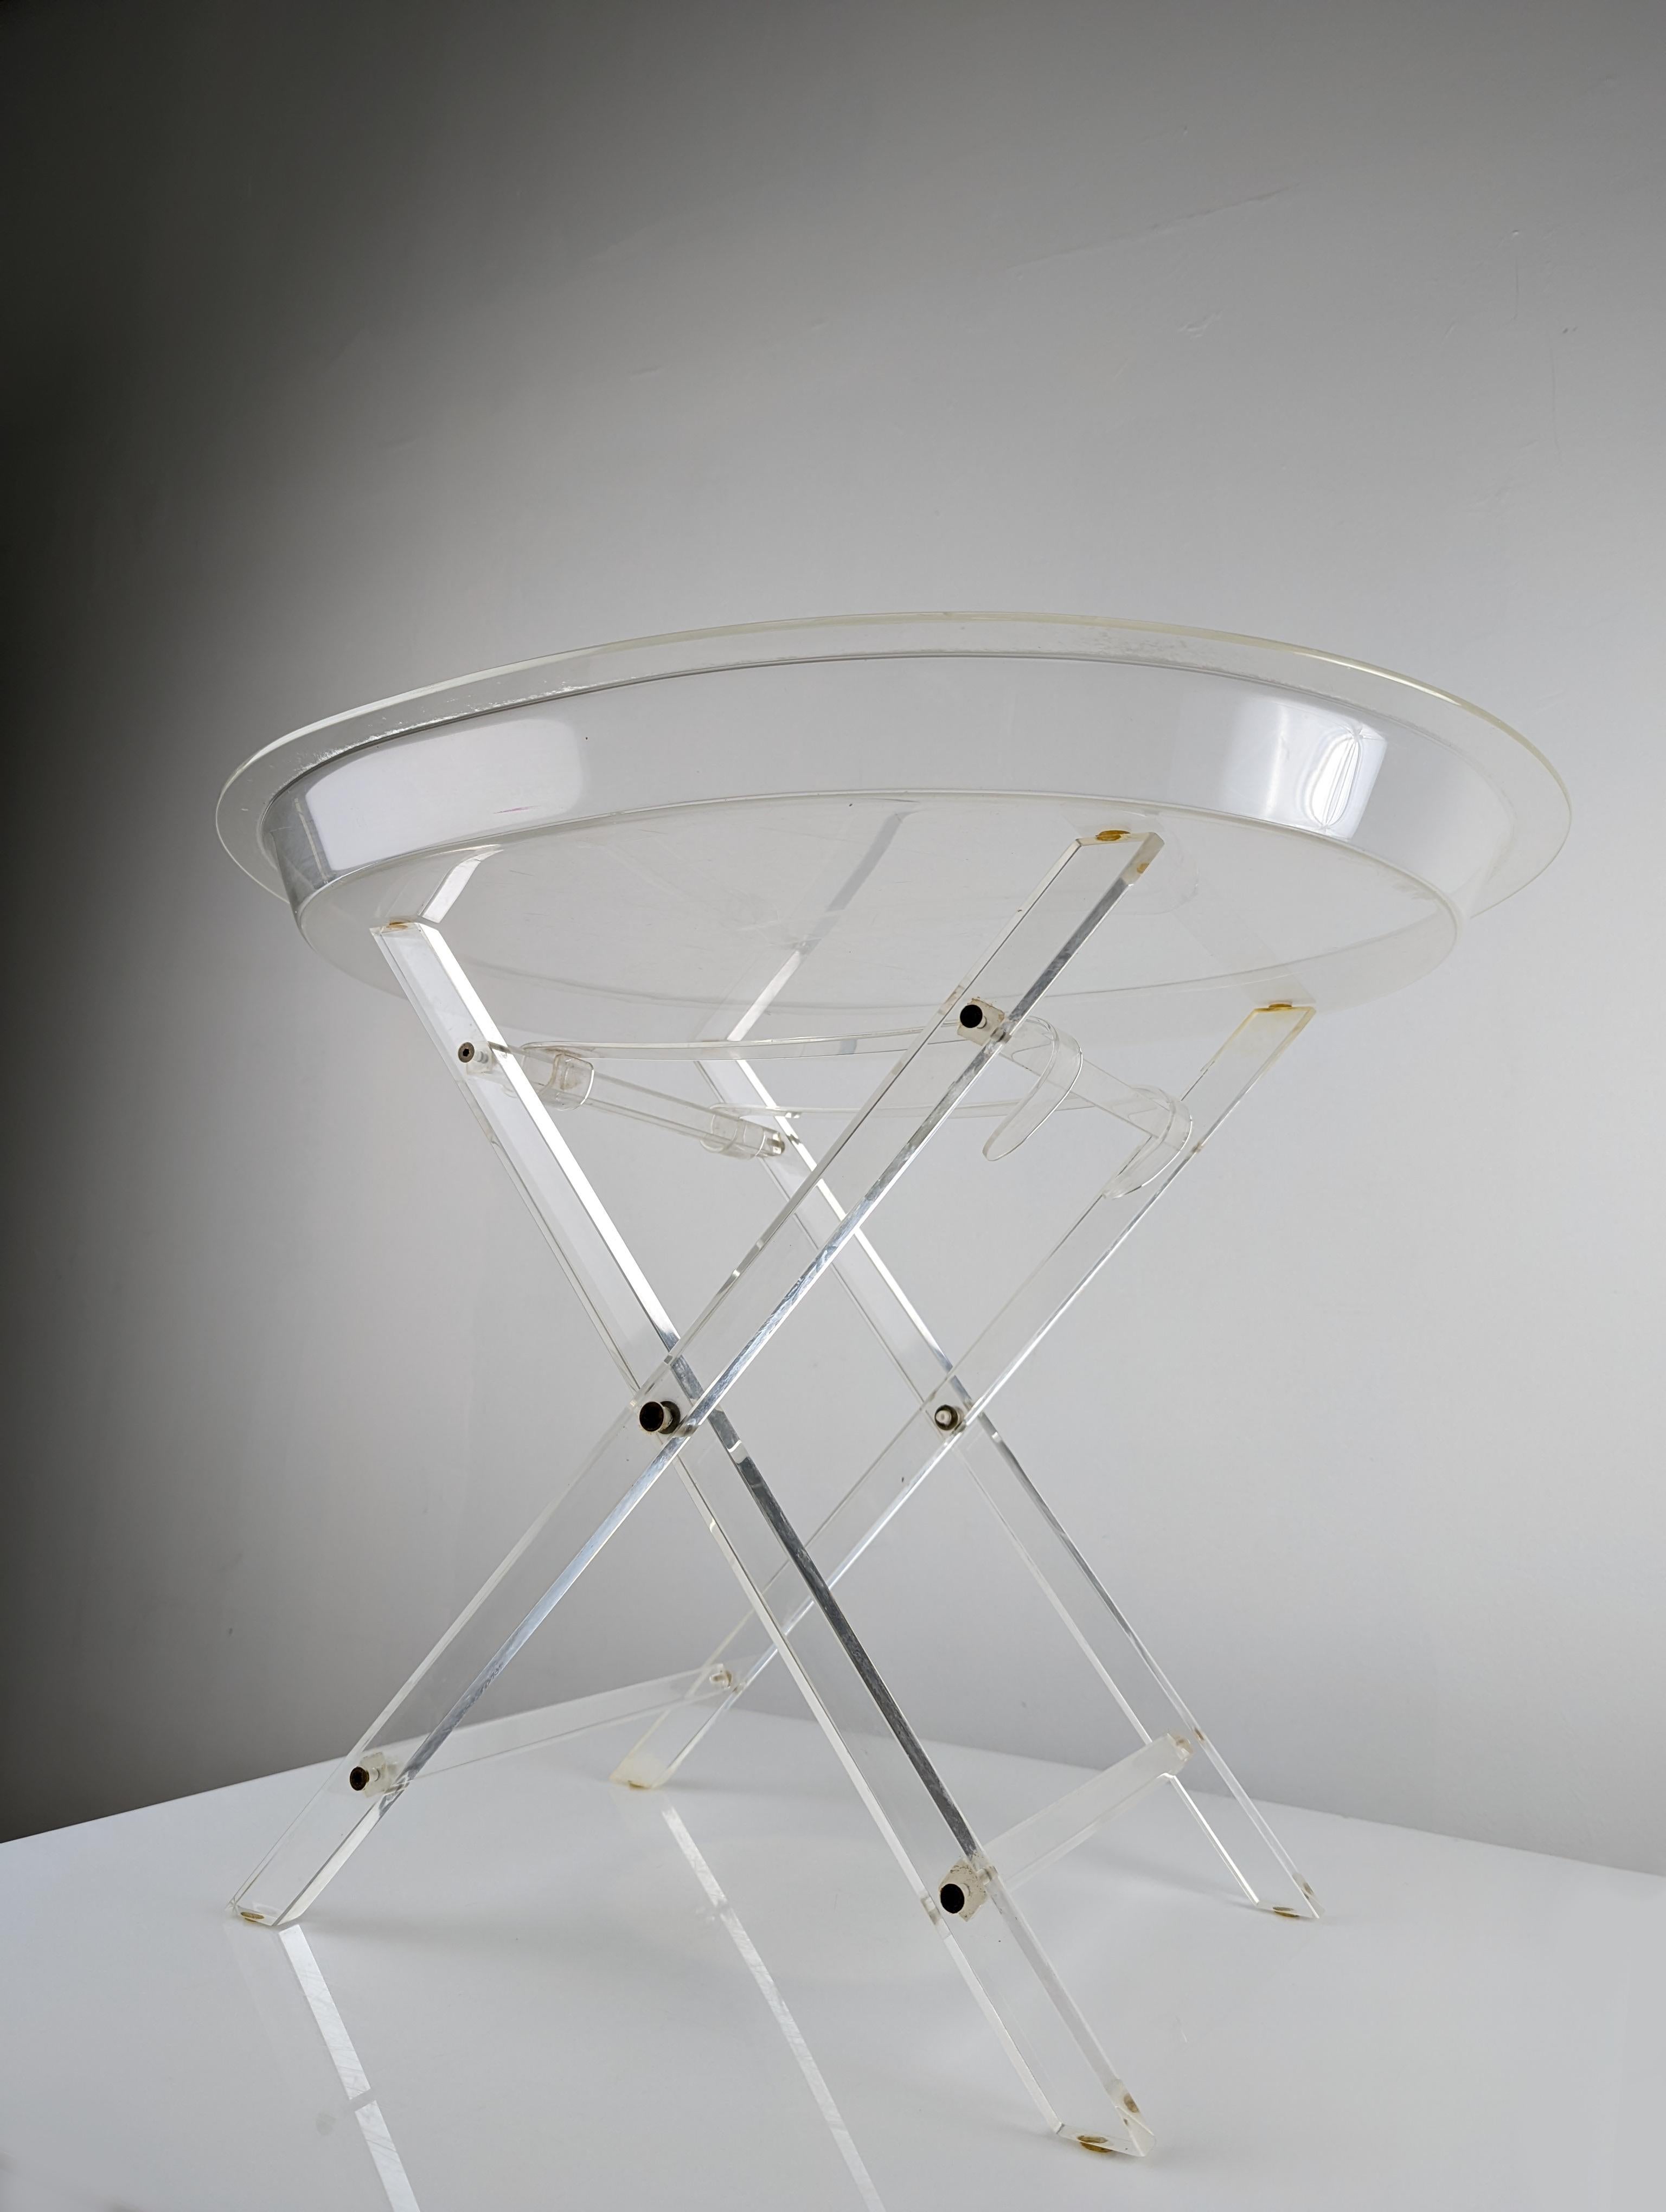 Fantastic folding service table with tray made entirely of transparent methacrylate.